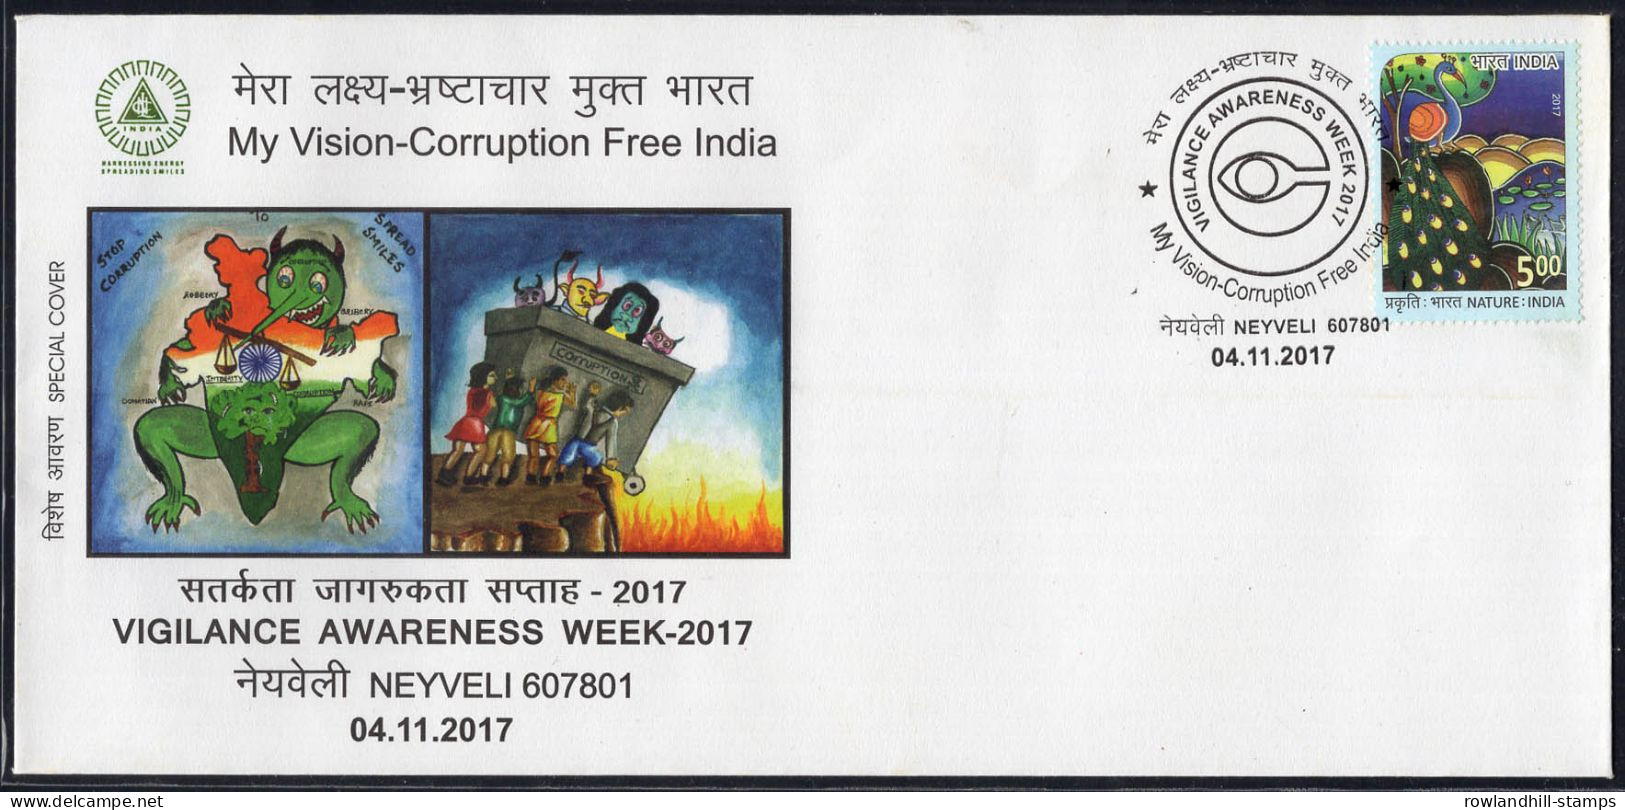 India, 2017, Special Cover, Vigilance Awareness Week - 2017, Neyveli, Corruption Free India, Eye, Inde, Indien, C23 - Covers & Documents